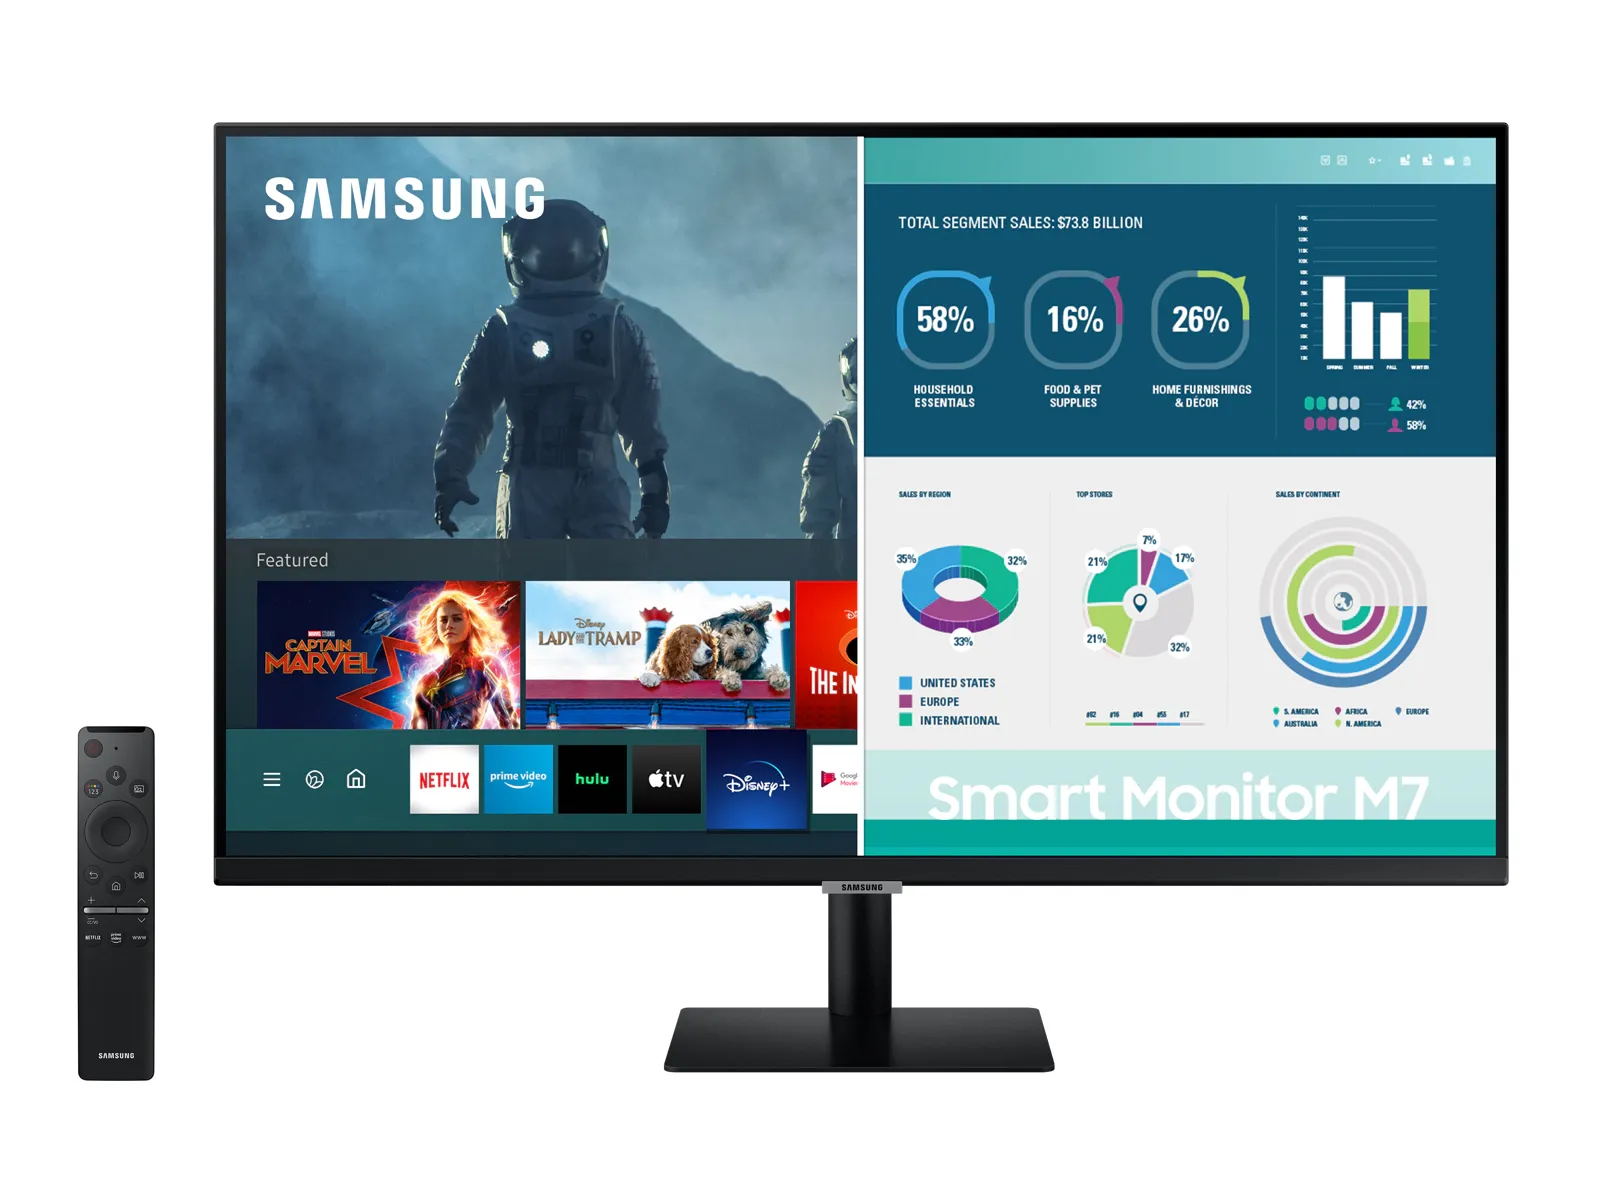 What if your monitor could still be useful without your PC around? This 4K Samsung Smart Monitor lets you expand your workspace, but when you don't have your computer, you can still stream TV shows, connect your phone, and even access your PC remotely. This one uses a USB Type-C connection, so you don't need any adapters for it.